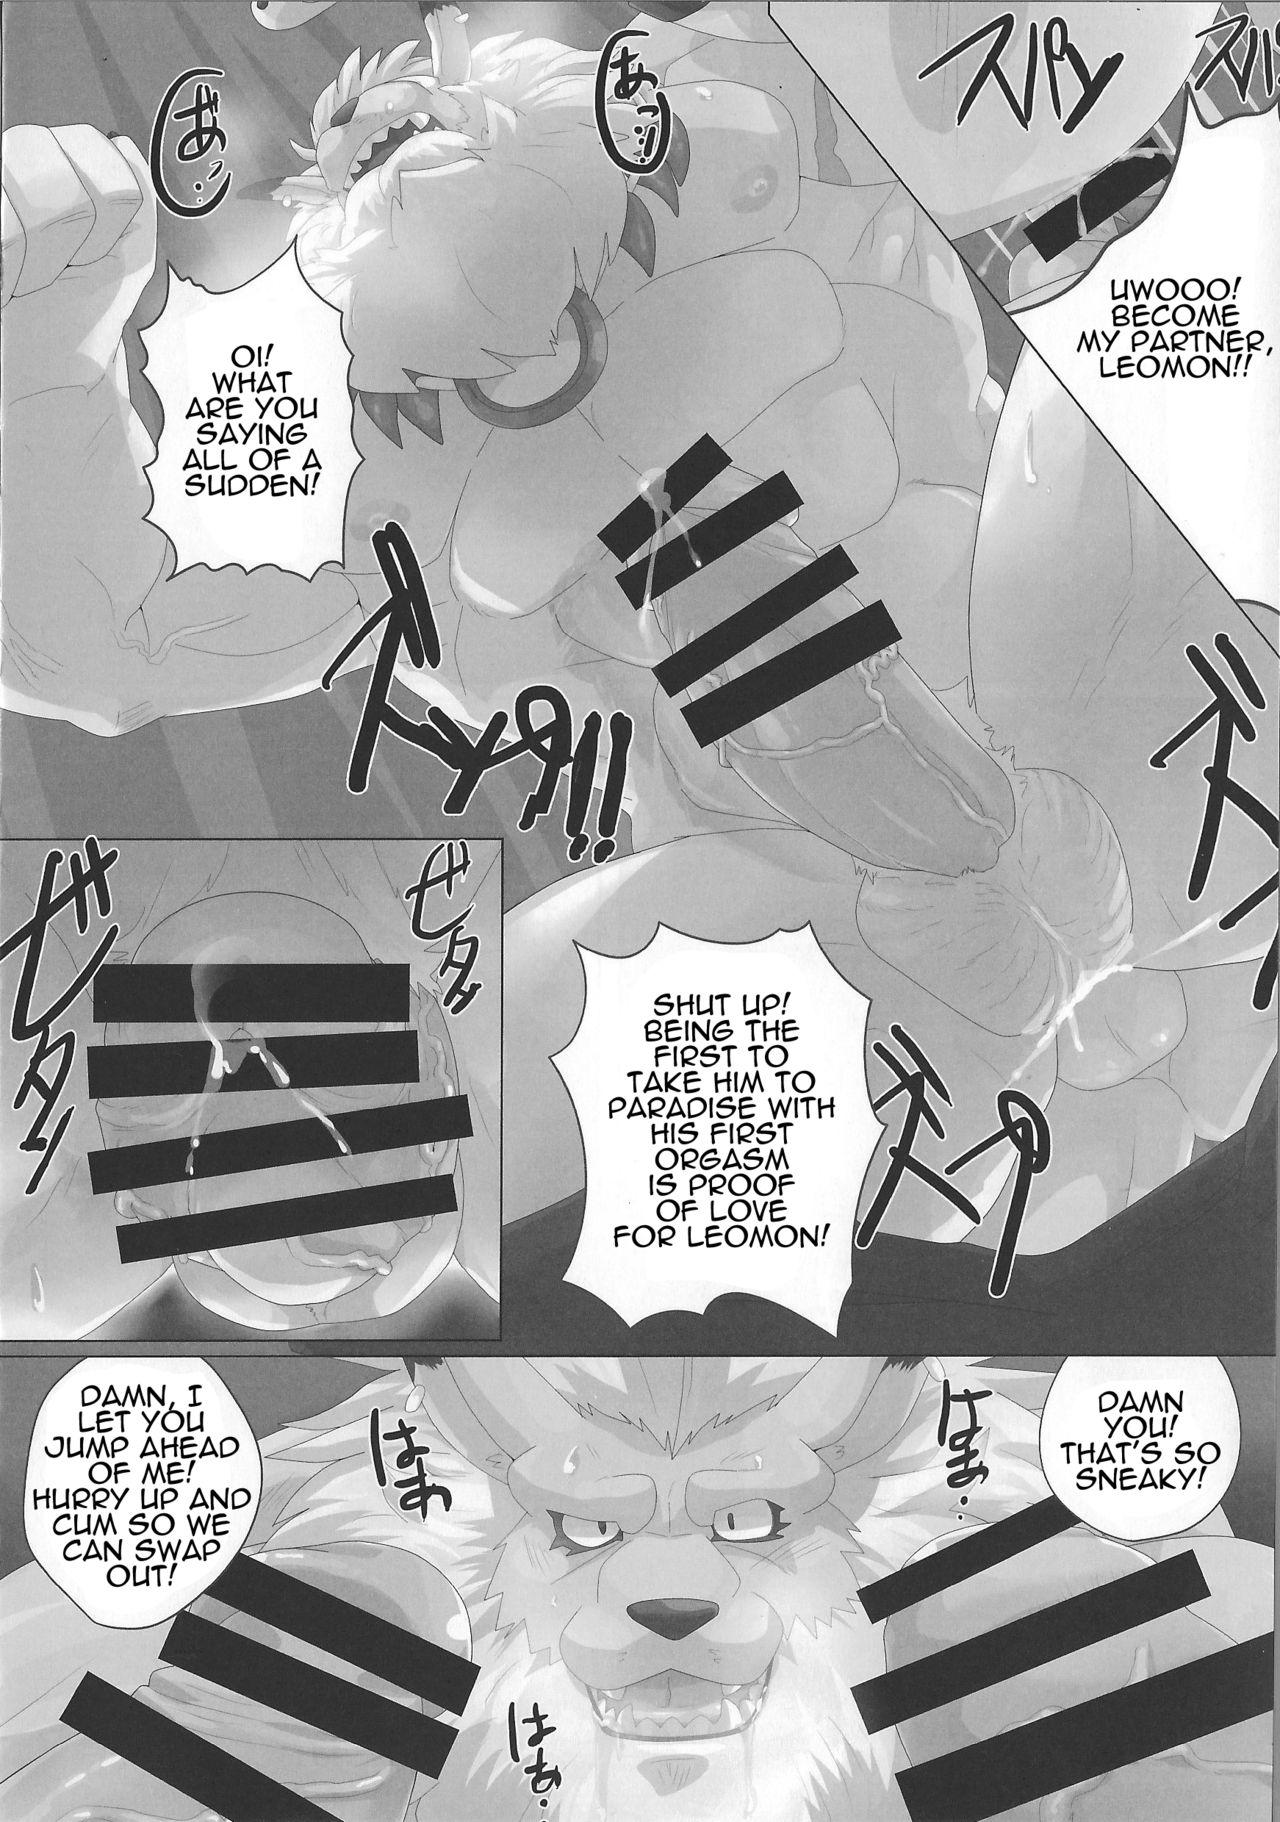 [Debirobu] For the Lion-Man Type Electric Life Form to Overturn Fate - Leomon Doujin [ENG] 16